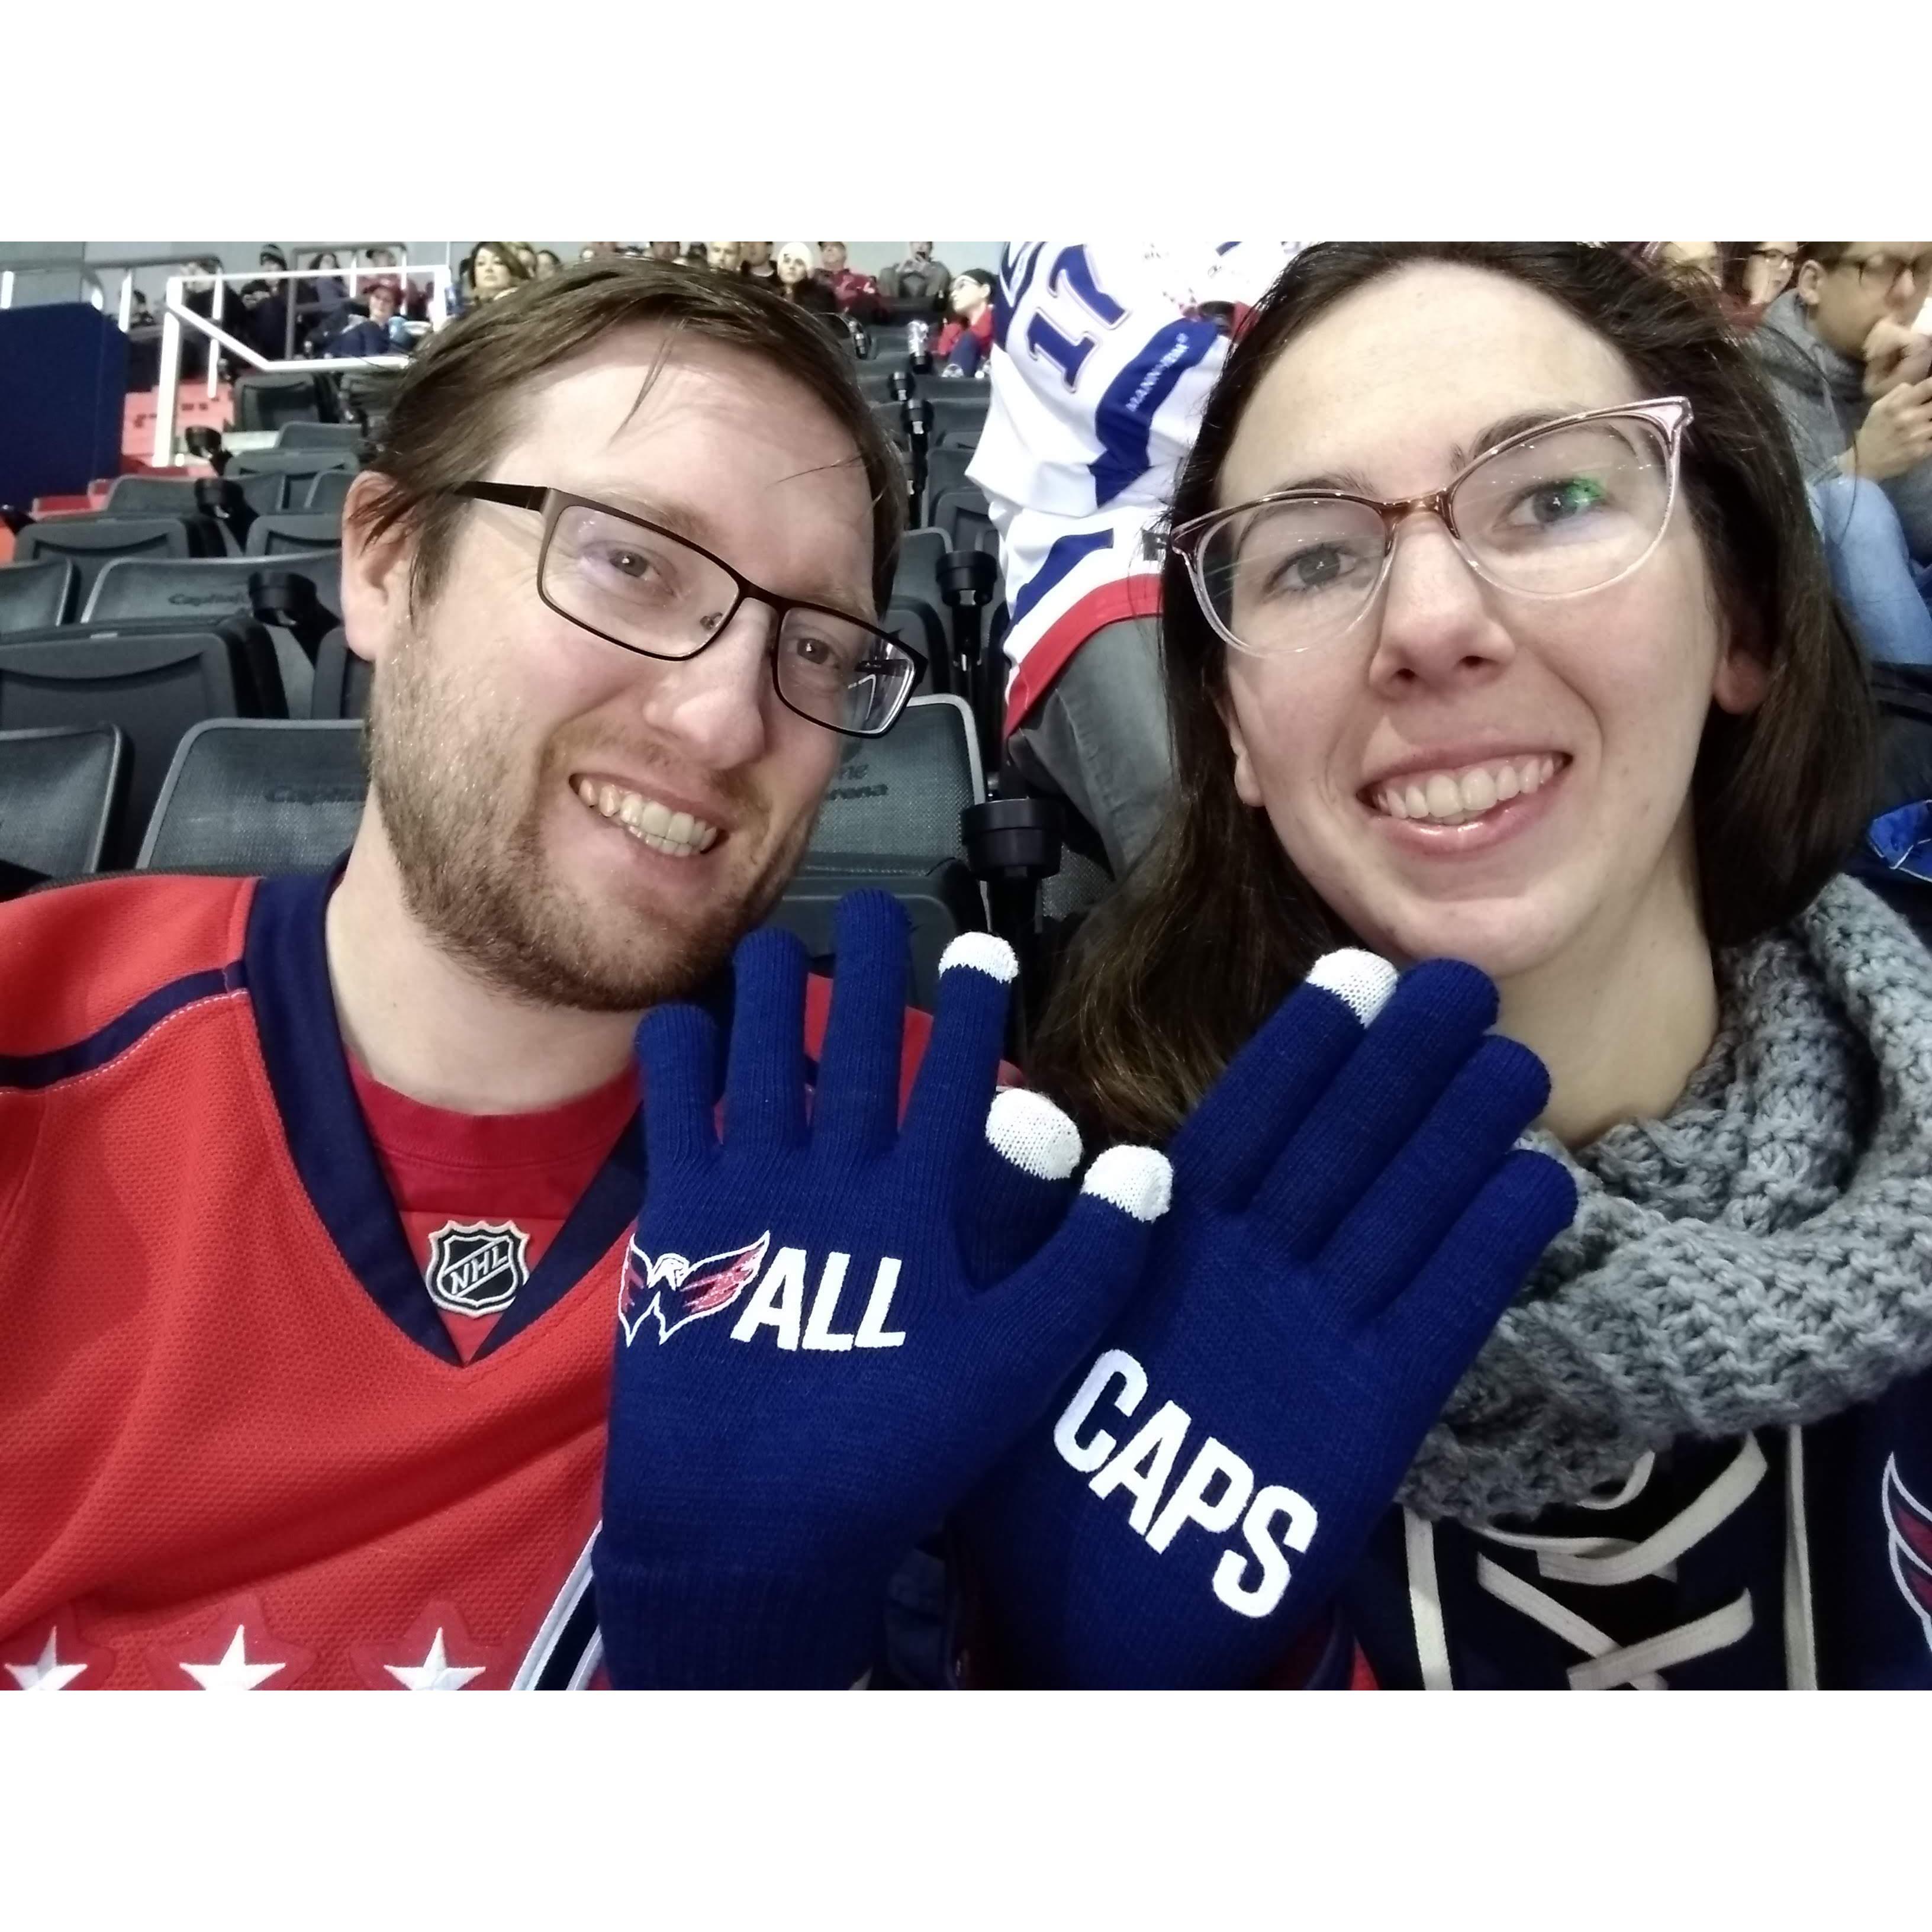 2019, first Caps game of the year, but definitely not the first ever.